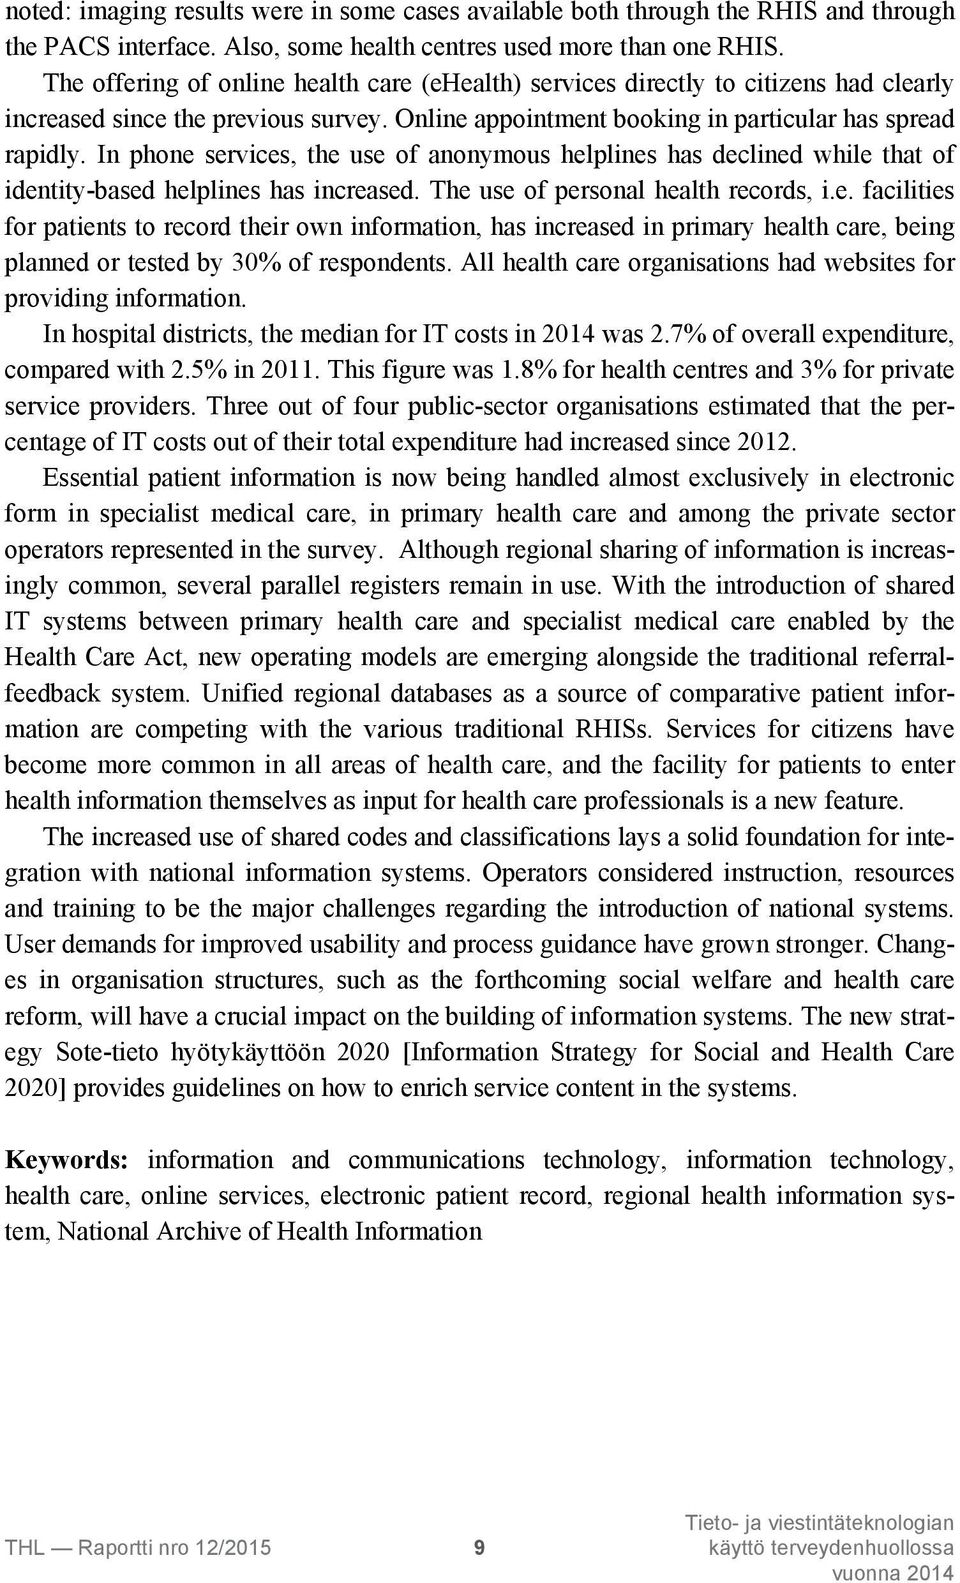 In phone services, the use of anonymous helplines has declined while that of identity-based helplines has increased. The use of personal health records, i.e. facilities for patients to record their own information, has increased in primary health care, being planned or tested by 30% of respondents.